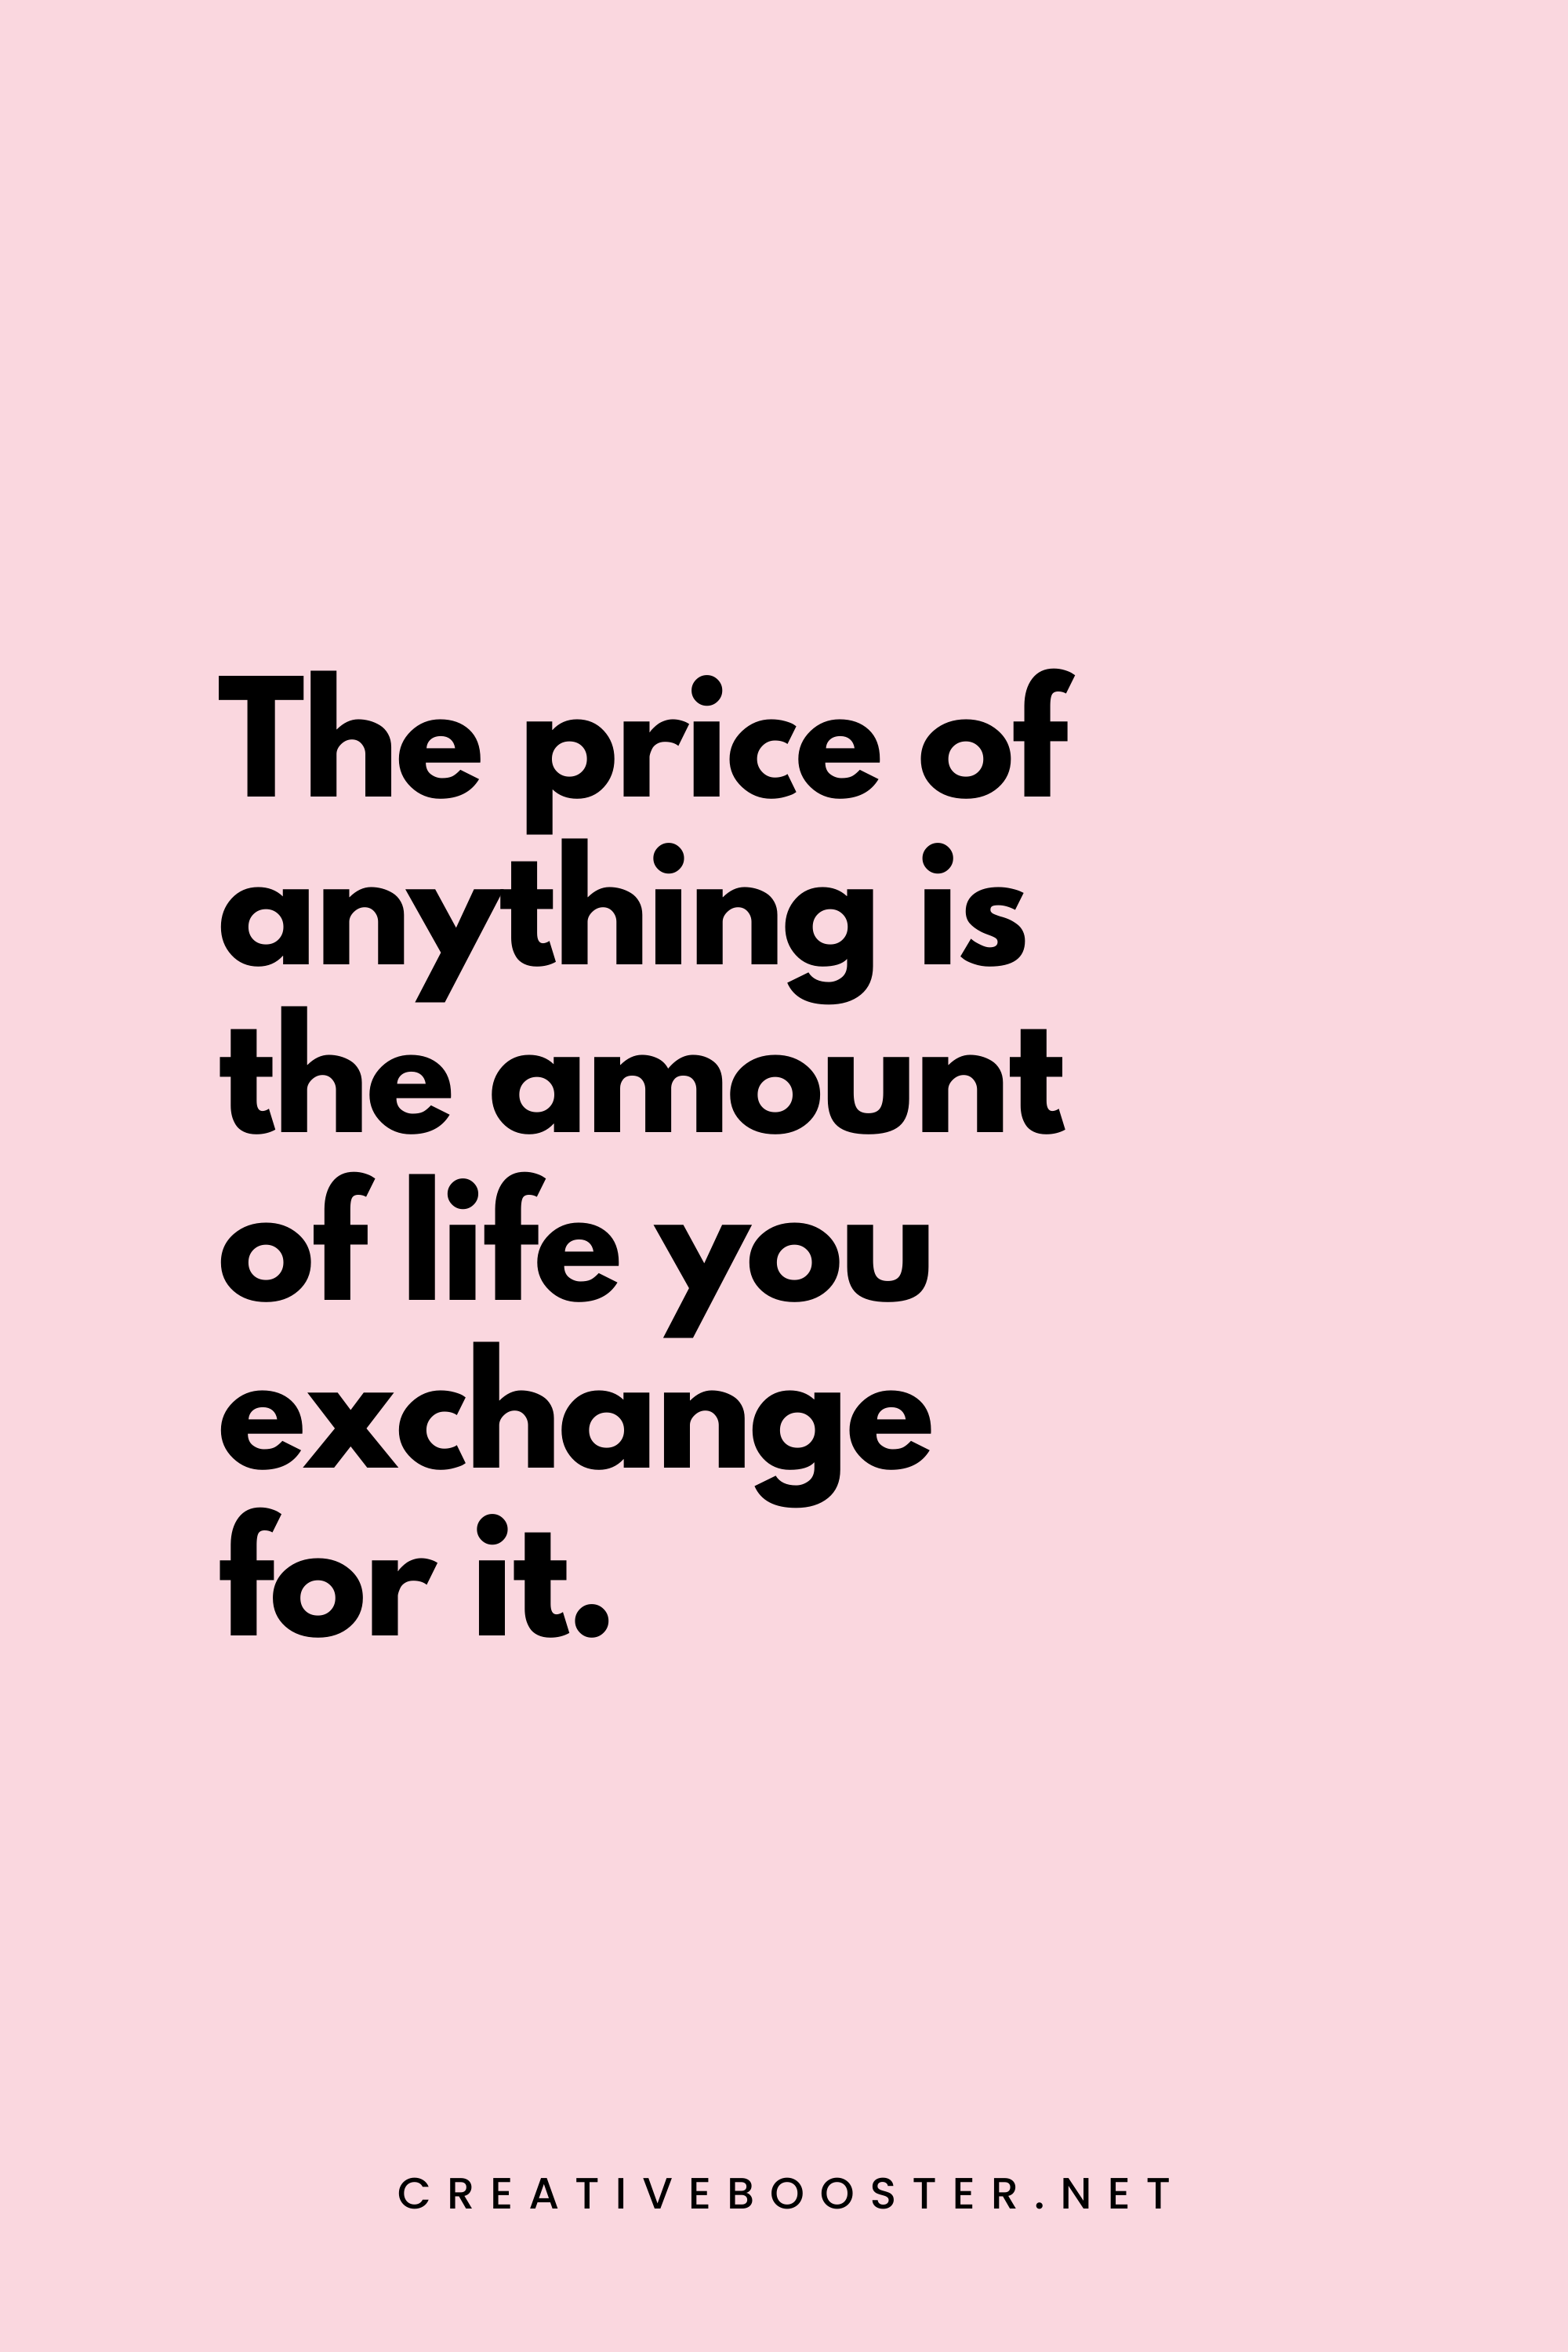 16. The price of anything is the amount of life you exchange for it. - Henry David Thoreau - 1. Popular Financial Freedom Quotes